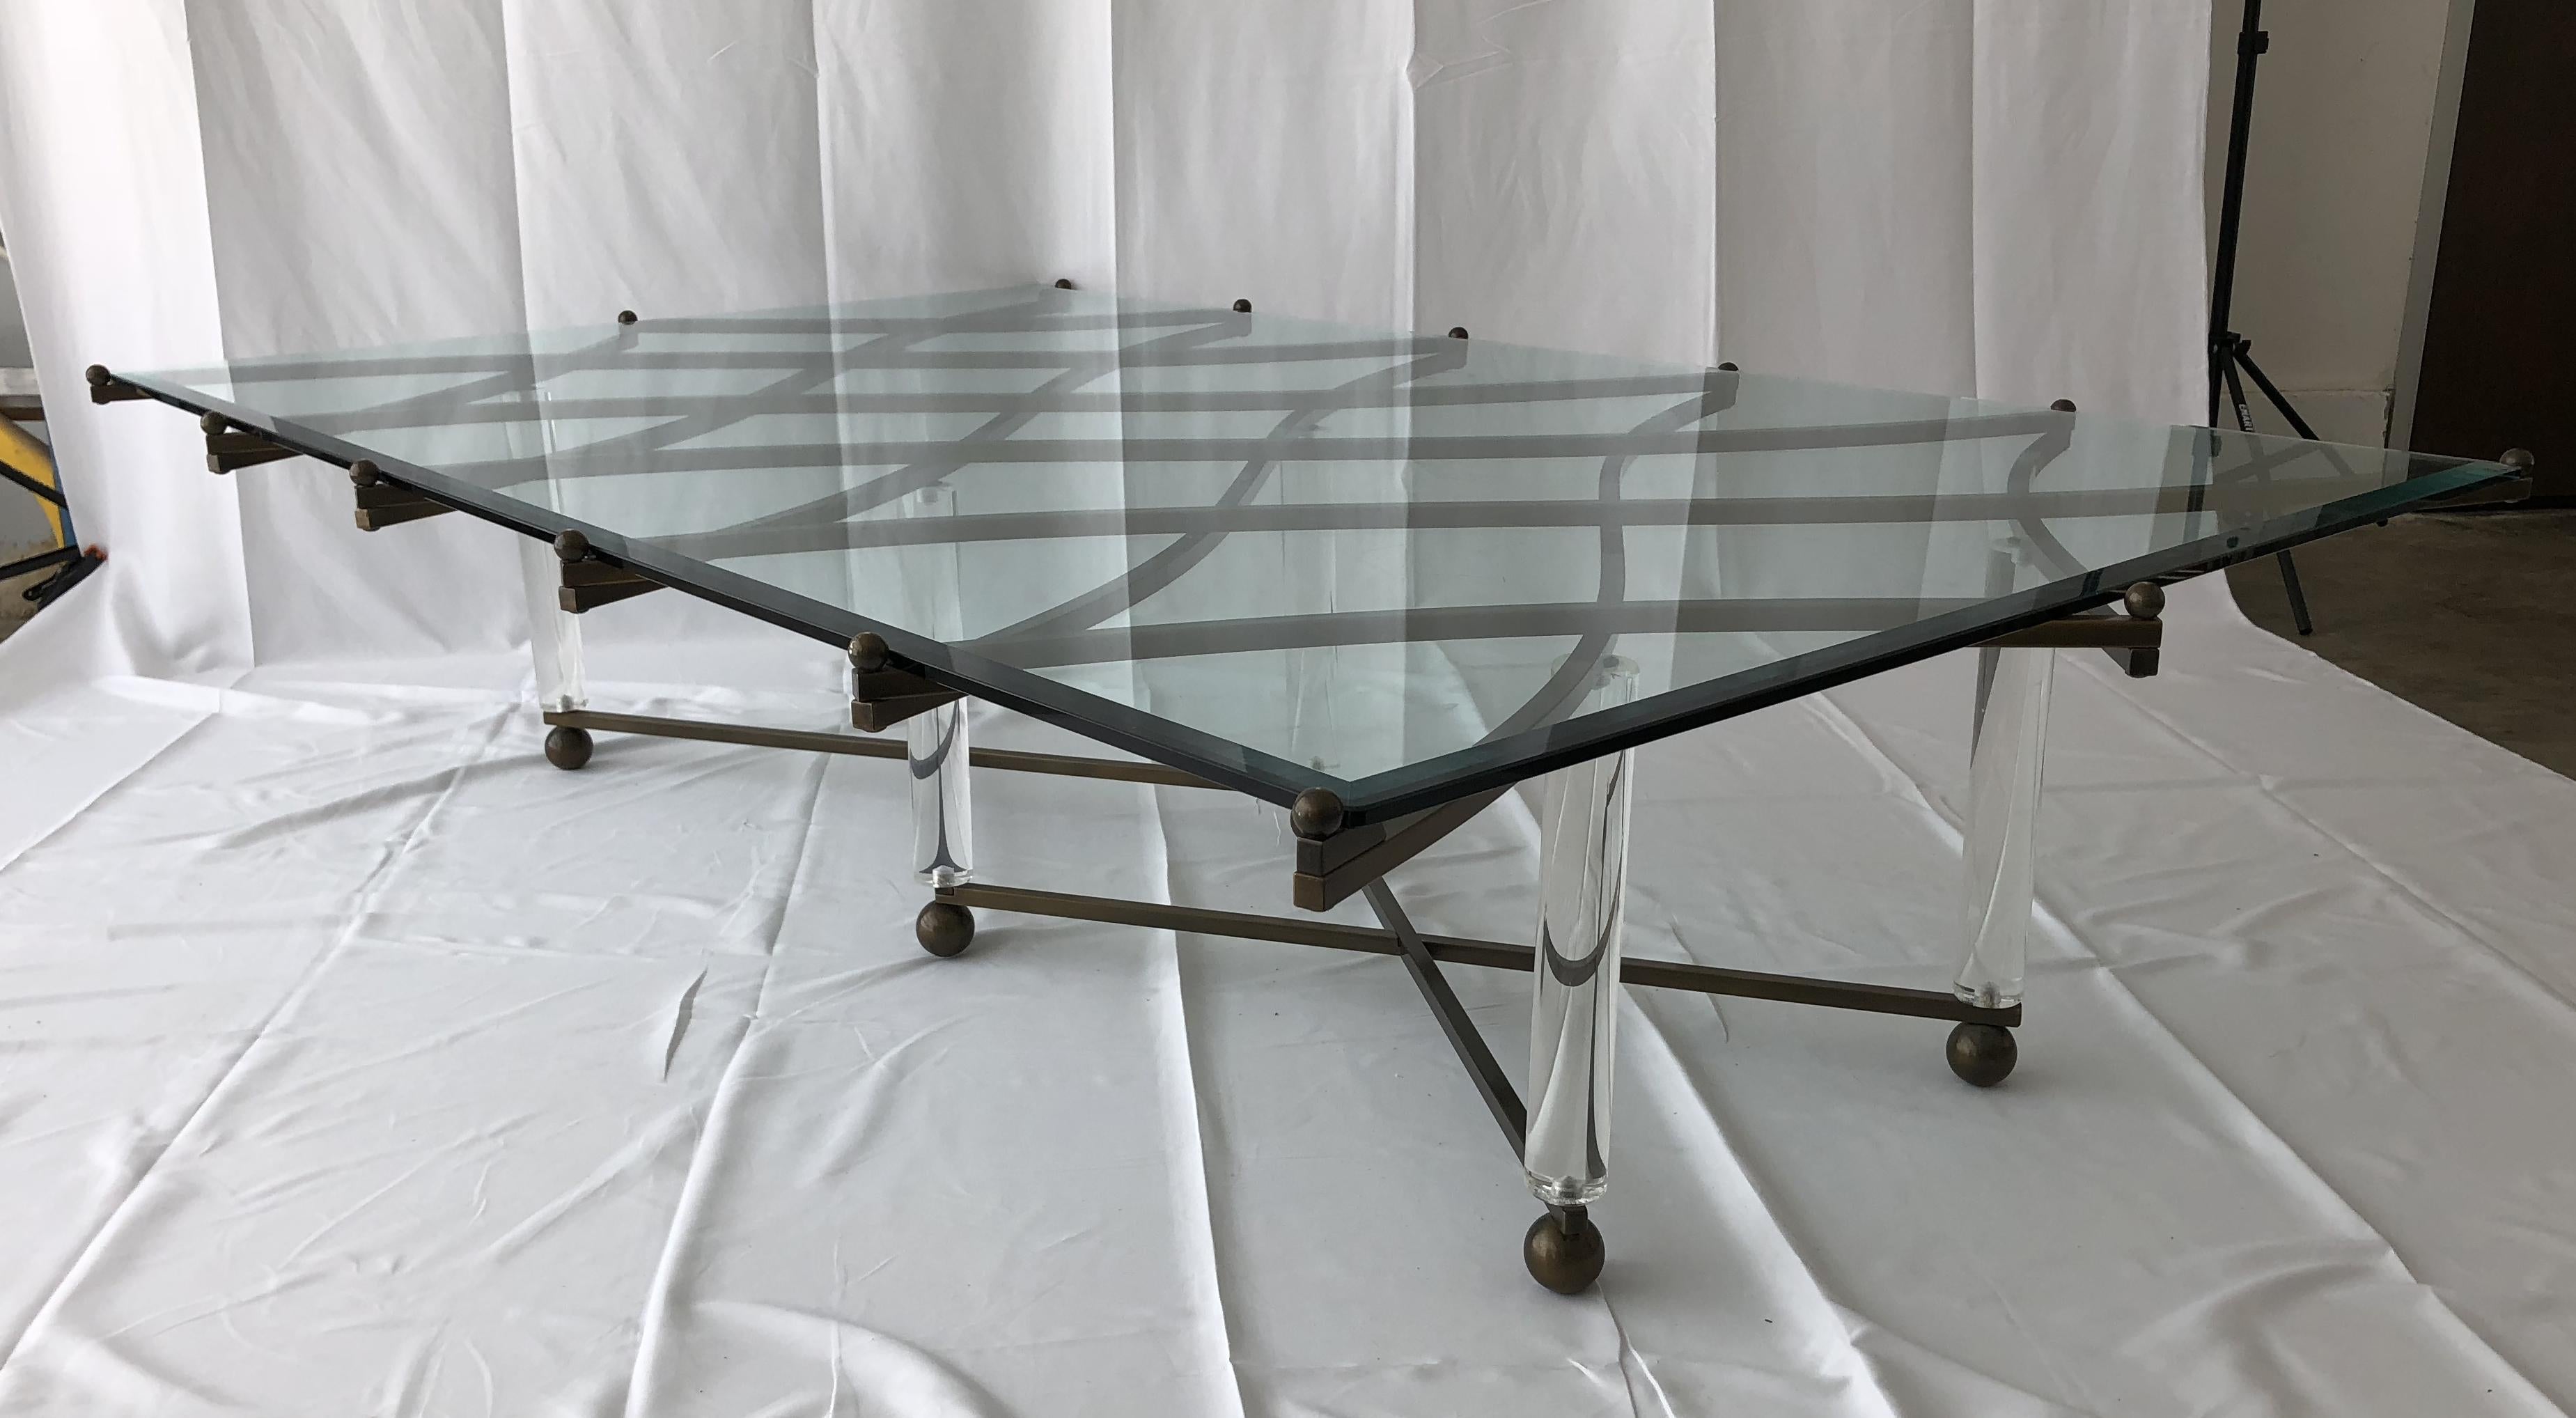 This amazing brass and Lucite coffee table by Hollis Jones is quite possibly his most exquisite design. 
Known for his innovation with the use of Lucite and metal, Hollis Jones is a master at combining elegance and wit. The brass lattice work of